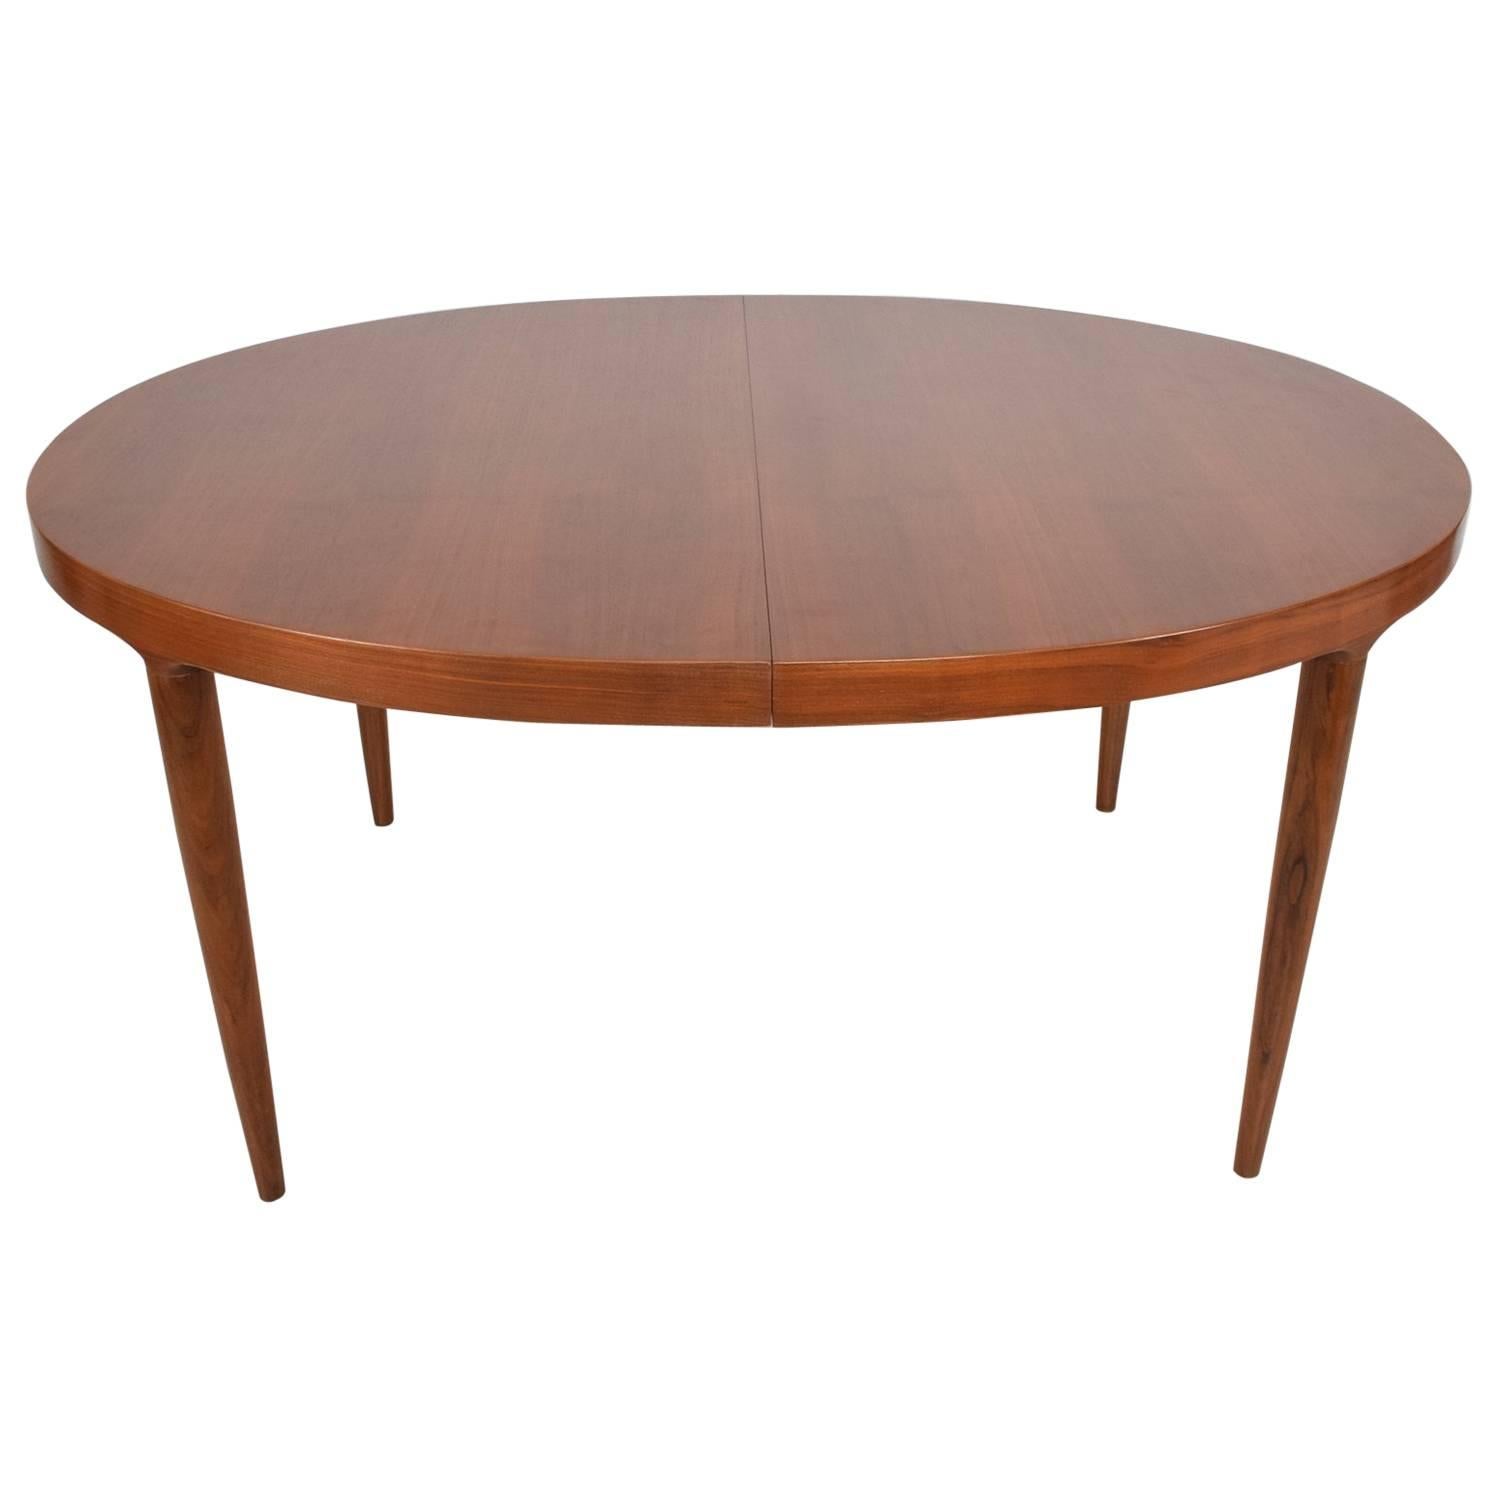 Midcentury Danish Modern Teak Dining Table in Excellent Condition